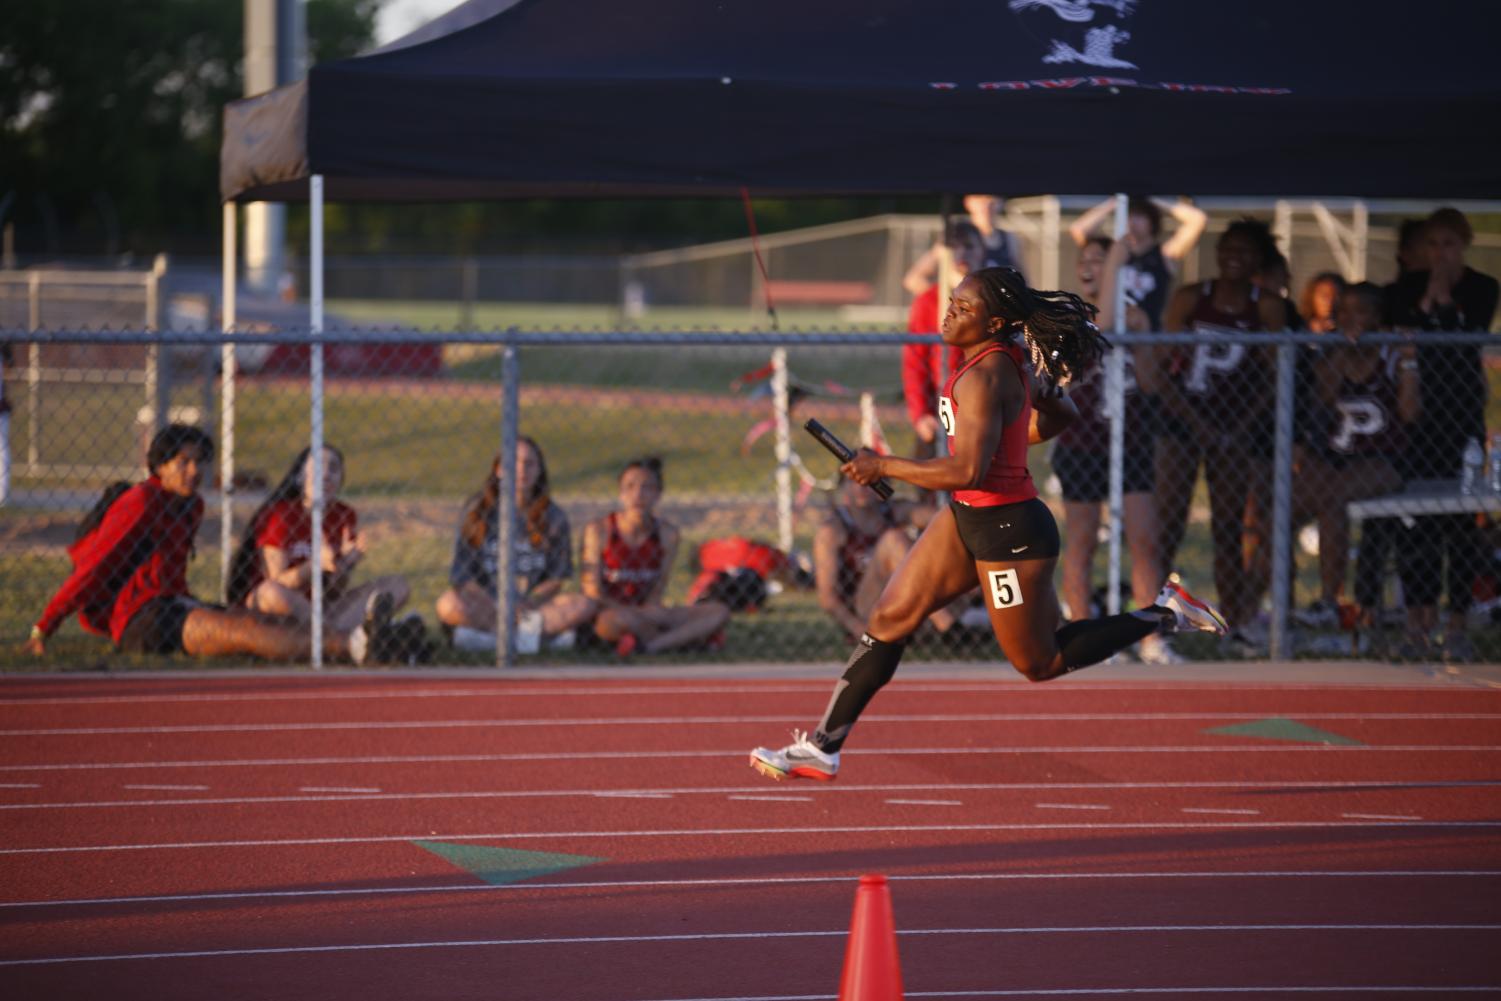 Senior Leila Ngapout runs the Girls Varsity 4x200m race. The girls got third with a time of 1:43.33.